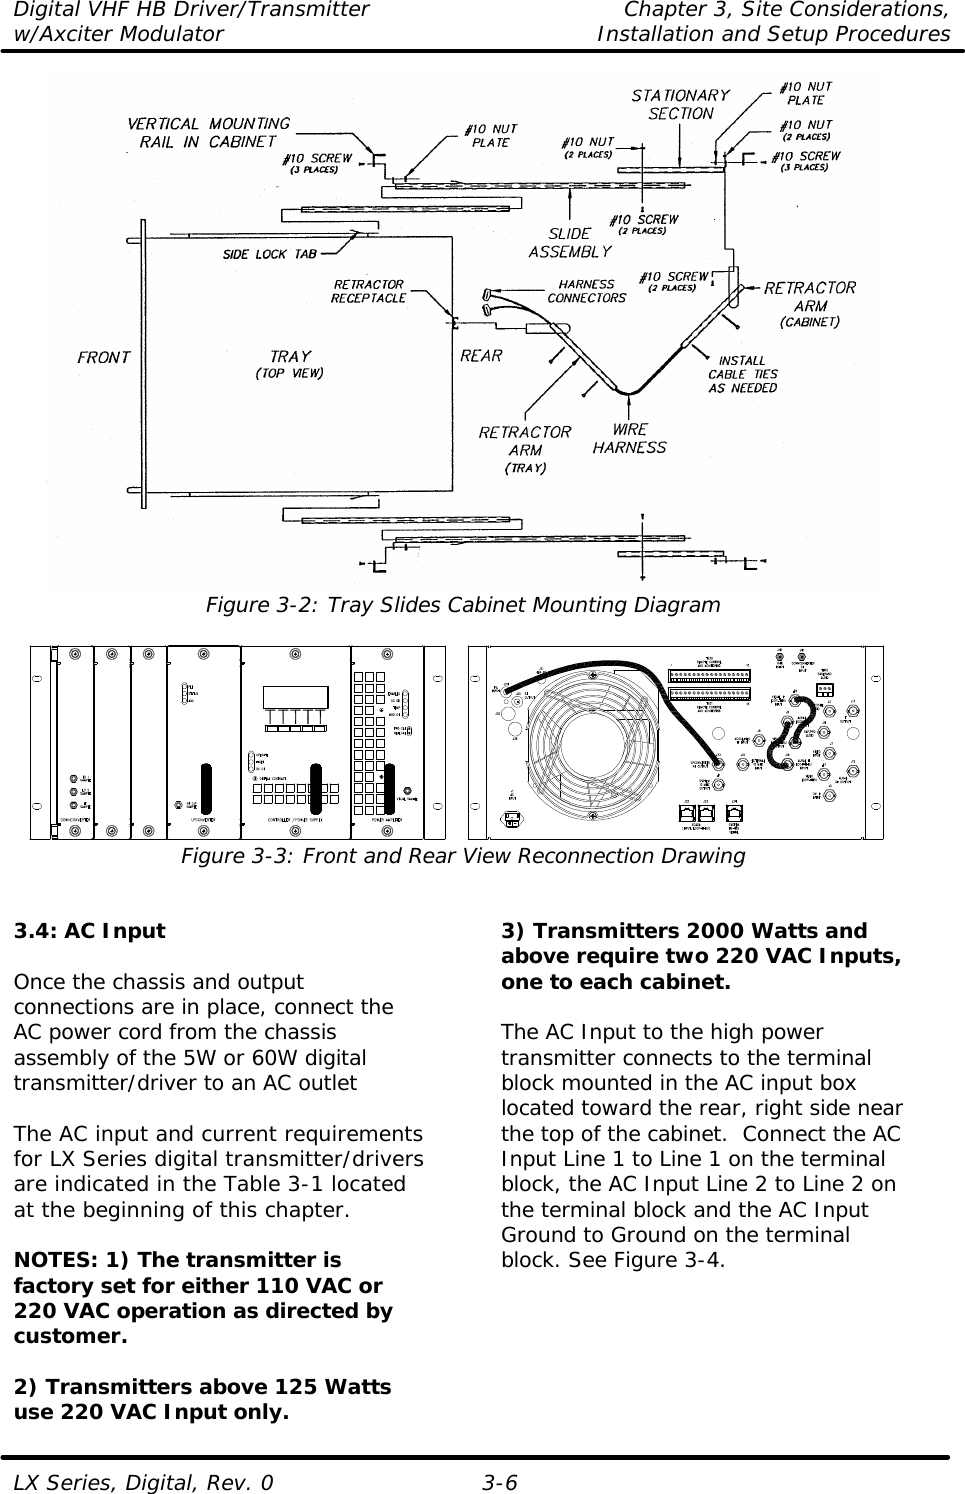 Digital VHF HB Driver/Transmitter Chapter 3, Site Considerations,  w/Axciter Modulator Installation and Setup Procedures  LX Series, Digital, Rev. 0 3-6  Figure 3-2: Tray Slides Cabinet Mounting Diagram   Figure 3-3: Front and Rear View Reconnection Drawing   3.4: AC Input  Once the chassis and output connections are in place, connect the AC power cord from the chassis assembly of the 5W or 60W digital transmitter/driver to an AC outlet  The AC input and current requirements for LX Series digital transmitter/drivers are indicated in the Table 3-1 located at the beginning of this chapter.  NOTES: 1) The transmitter is factory set for either 110 VAC or 220 VAC operation as directed by customer.  2) Transmitters above 125 Watts use 220 VAC Input only. 3) Transmitters 2000 Watts and above require two 220 VAC Inputs, one to each cabinet.  The AC Input to the high power transmitter connects to the terminal block mounted in the AC input box located toward the rear, right side near the top of the cabinet.  Connect the AC Input Line 1 to Line 1 on the terminal block, the AC Input Line 2 to Line 2 on the terminal block and the AC Input Ground to Ground on the terminal block. See Figure 3-4.  